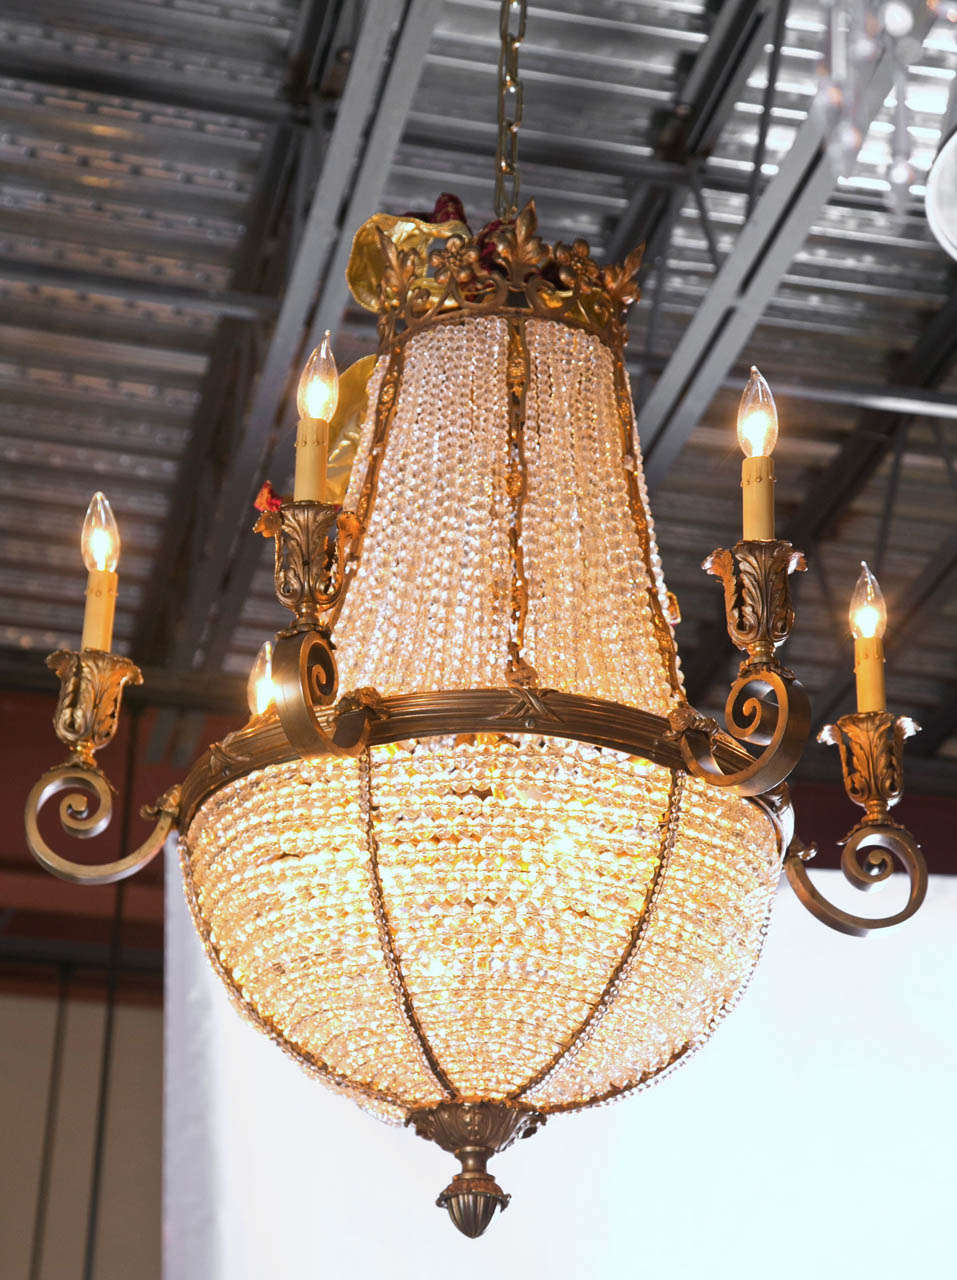 This antique French bronze chandelier is simply elegant. This ballroom chandelier is made with clear crystal balls in various sizes and mesh lining. The chandelier is 6 arm in torch style and has acanthus leaf, dogwood flower, and fleur de fleur